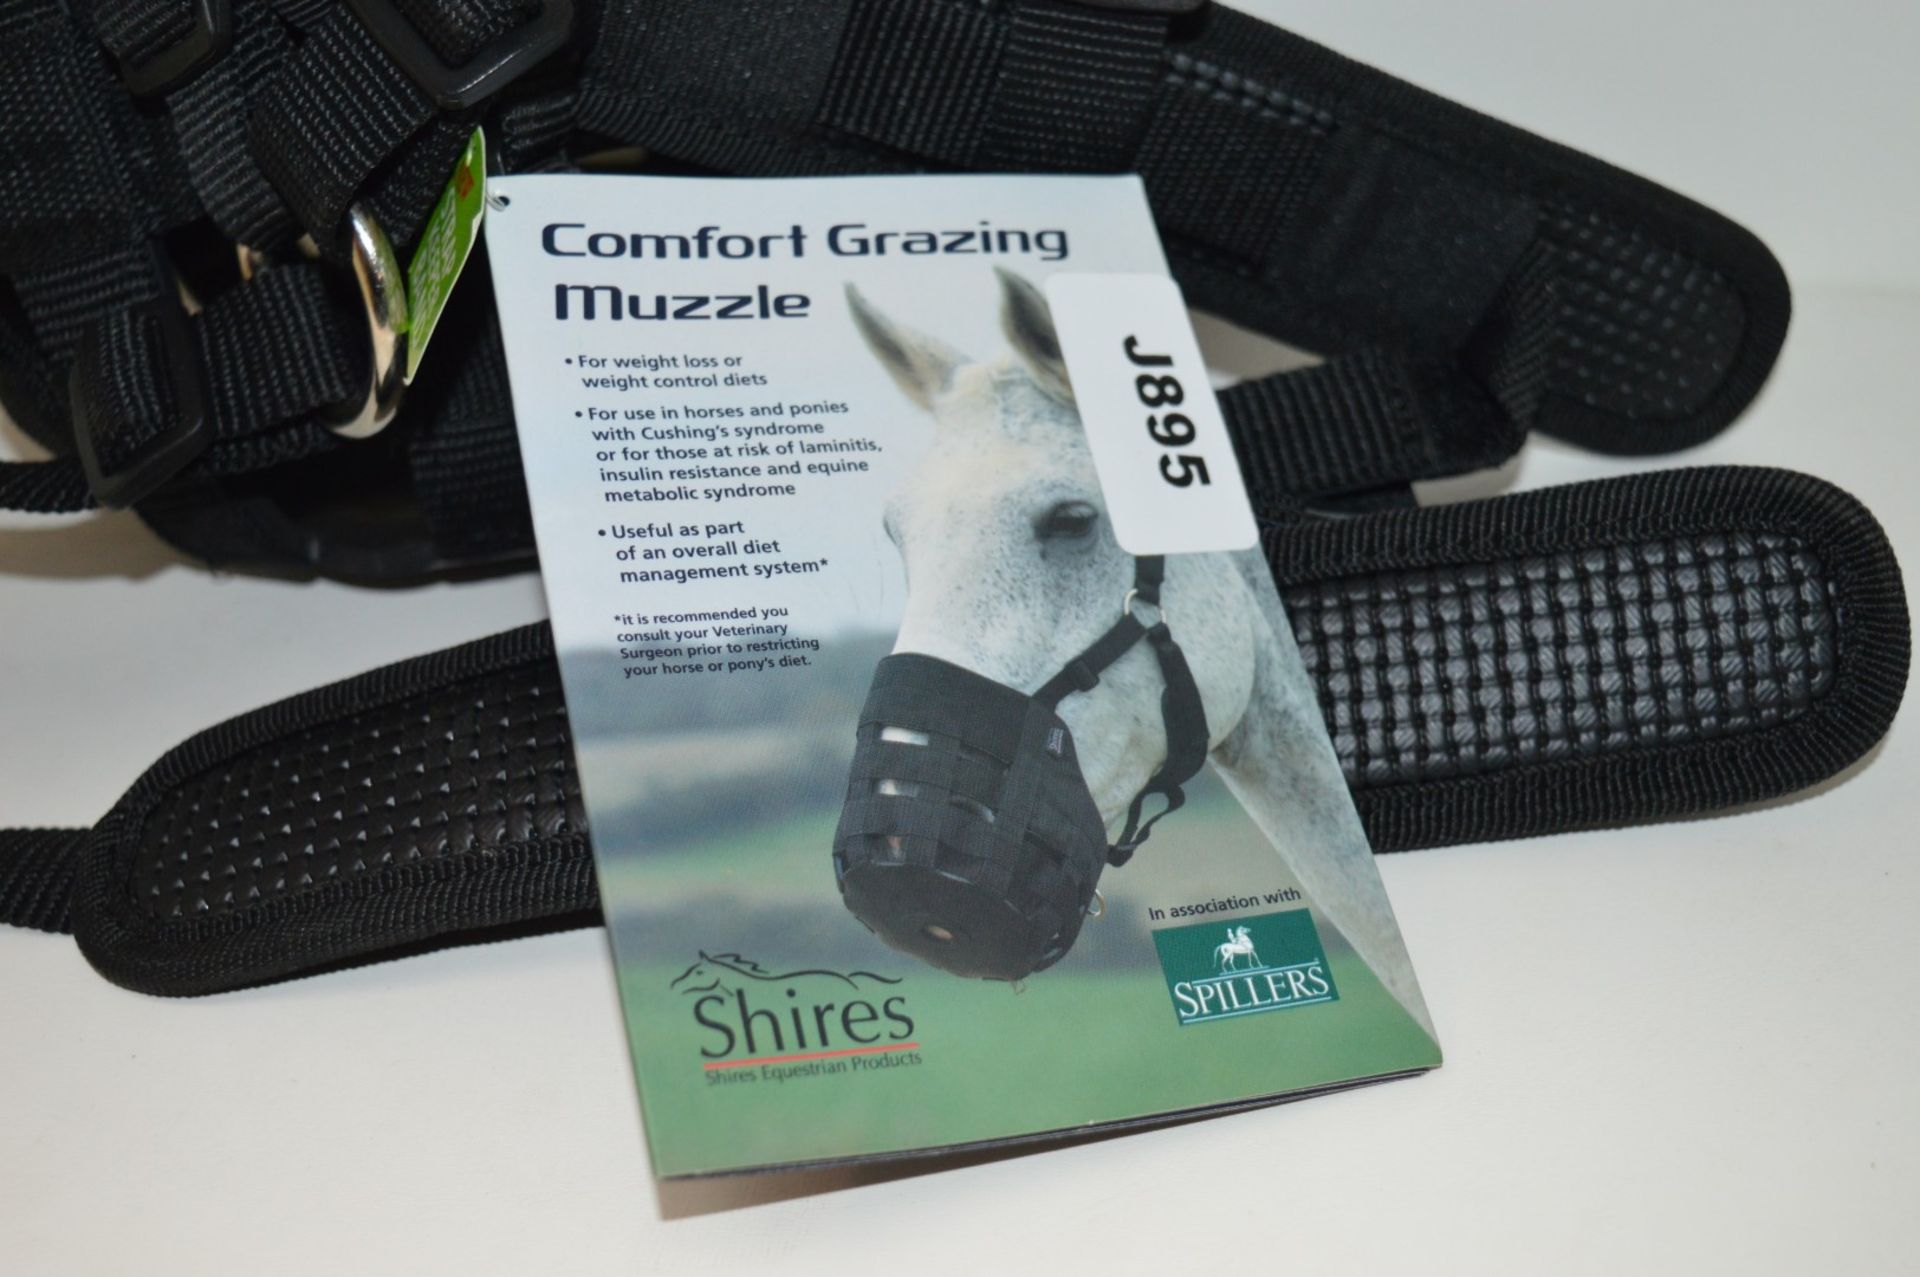 1 x Shires Comfort Grazing Muzzle - Cob 495N Black - New Stock - CL401 - Ref J895 - Location: - Image 2 of 4